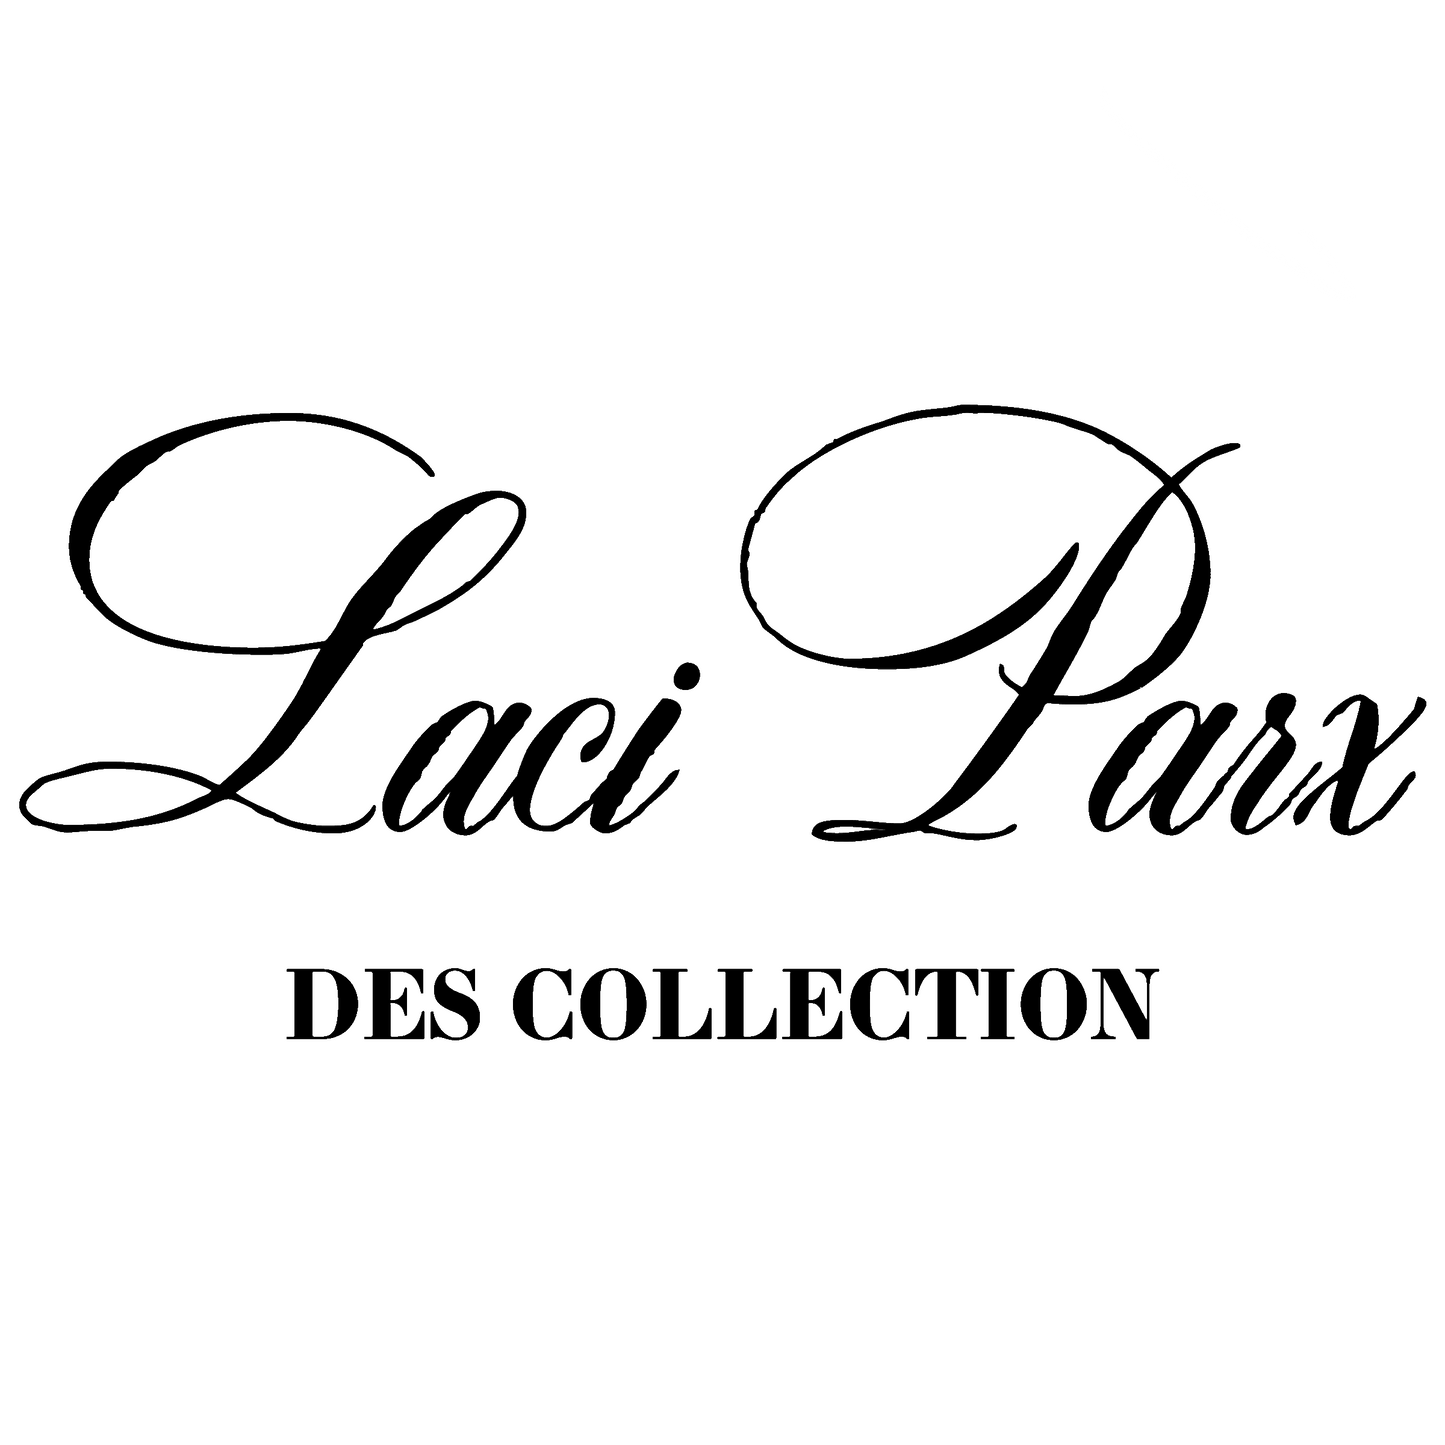 Laci Parx Gift Card | Luxury Fragrance Brand | LaciParxCollection